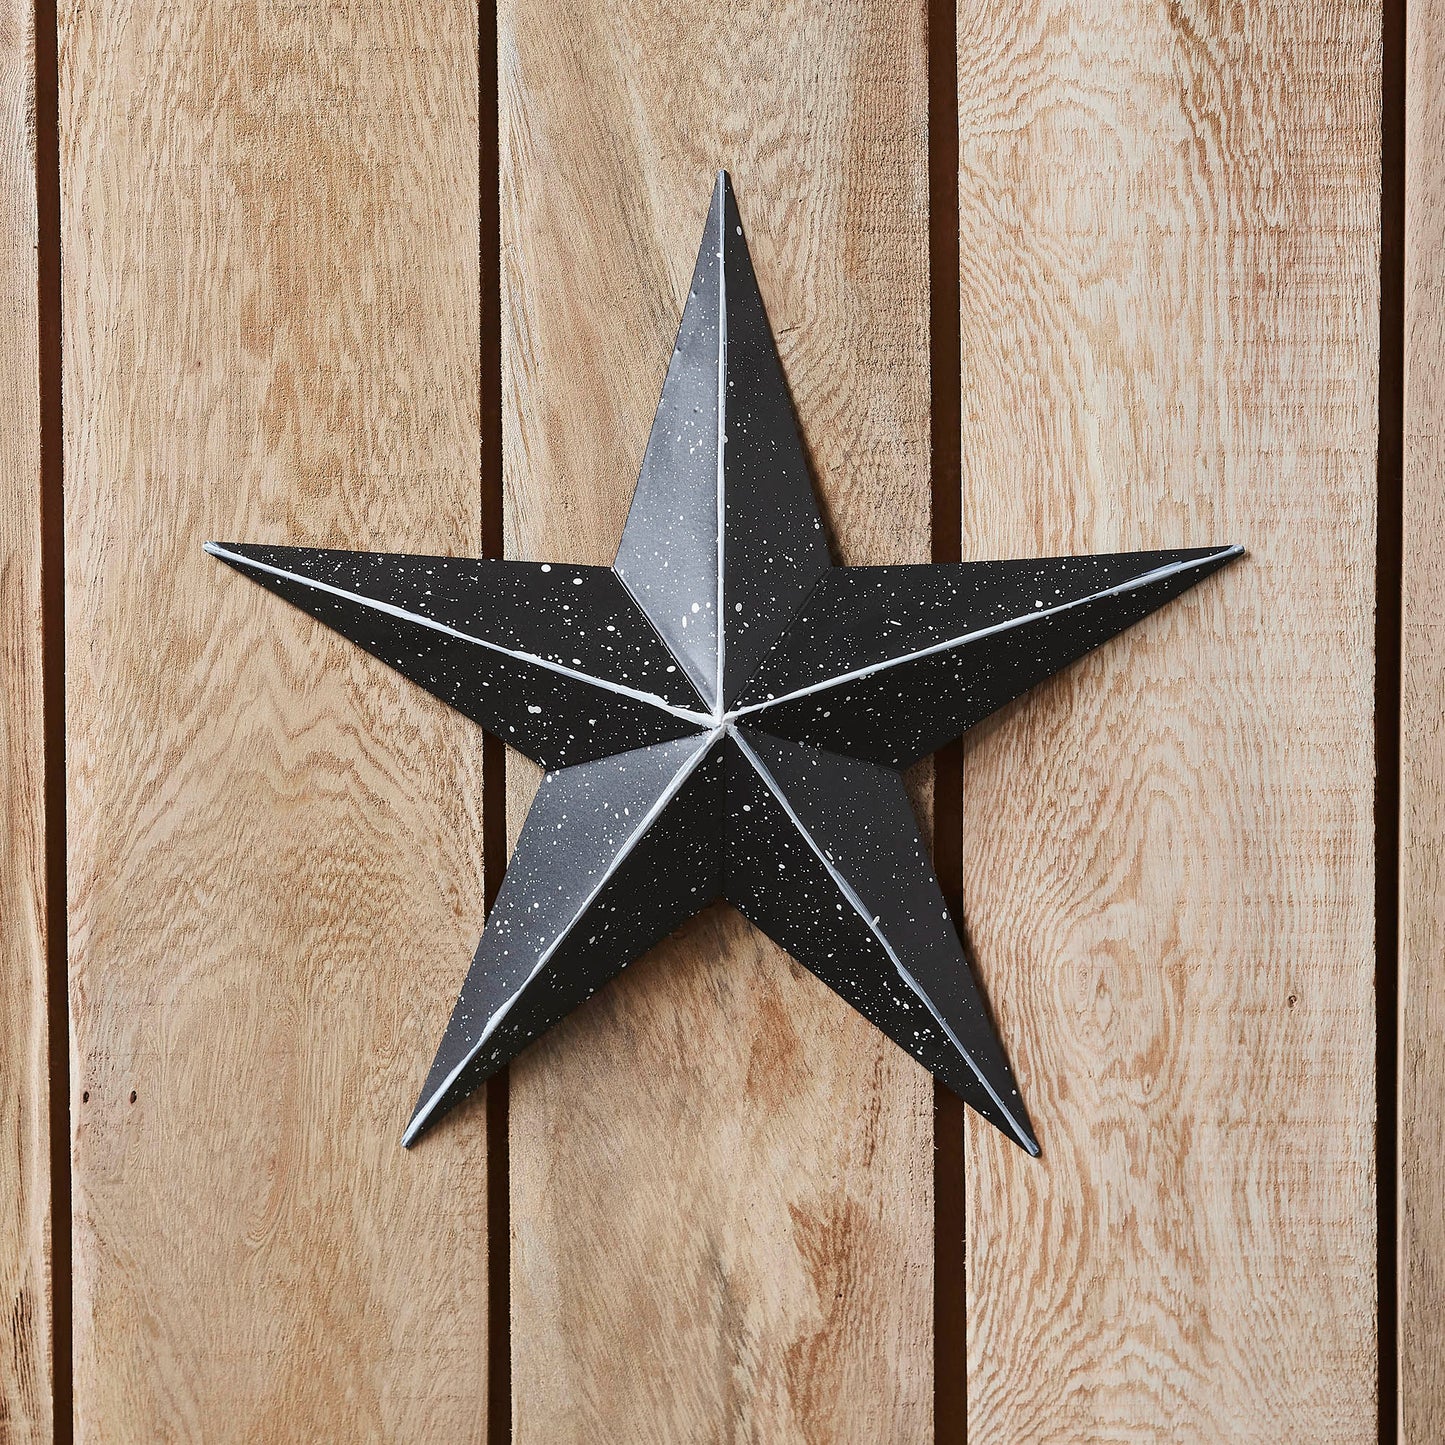 VHC Brands Patriotic Faceted Metal Star Black Wall Hanging 12x12, Independence Day Decor, American Star Design, Distressed Appearance Metal Wall Hanging,  Star Shape, Country, Charcoal Black